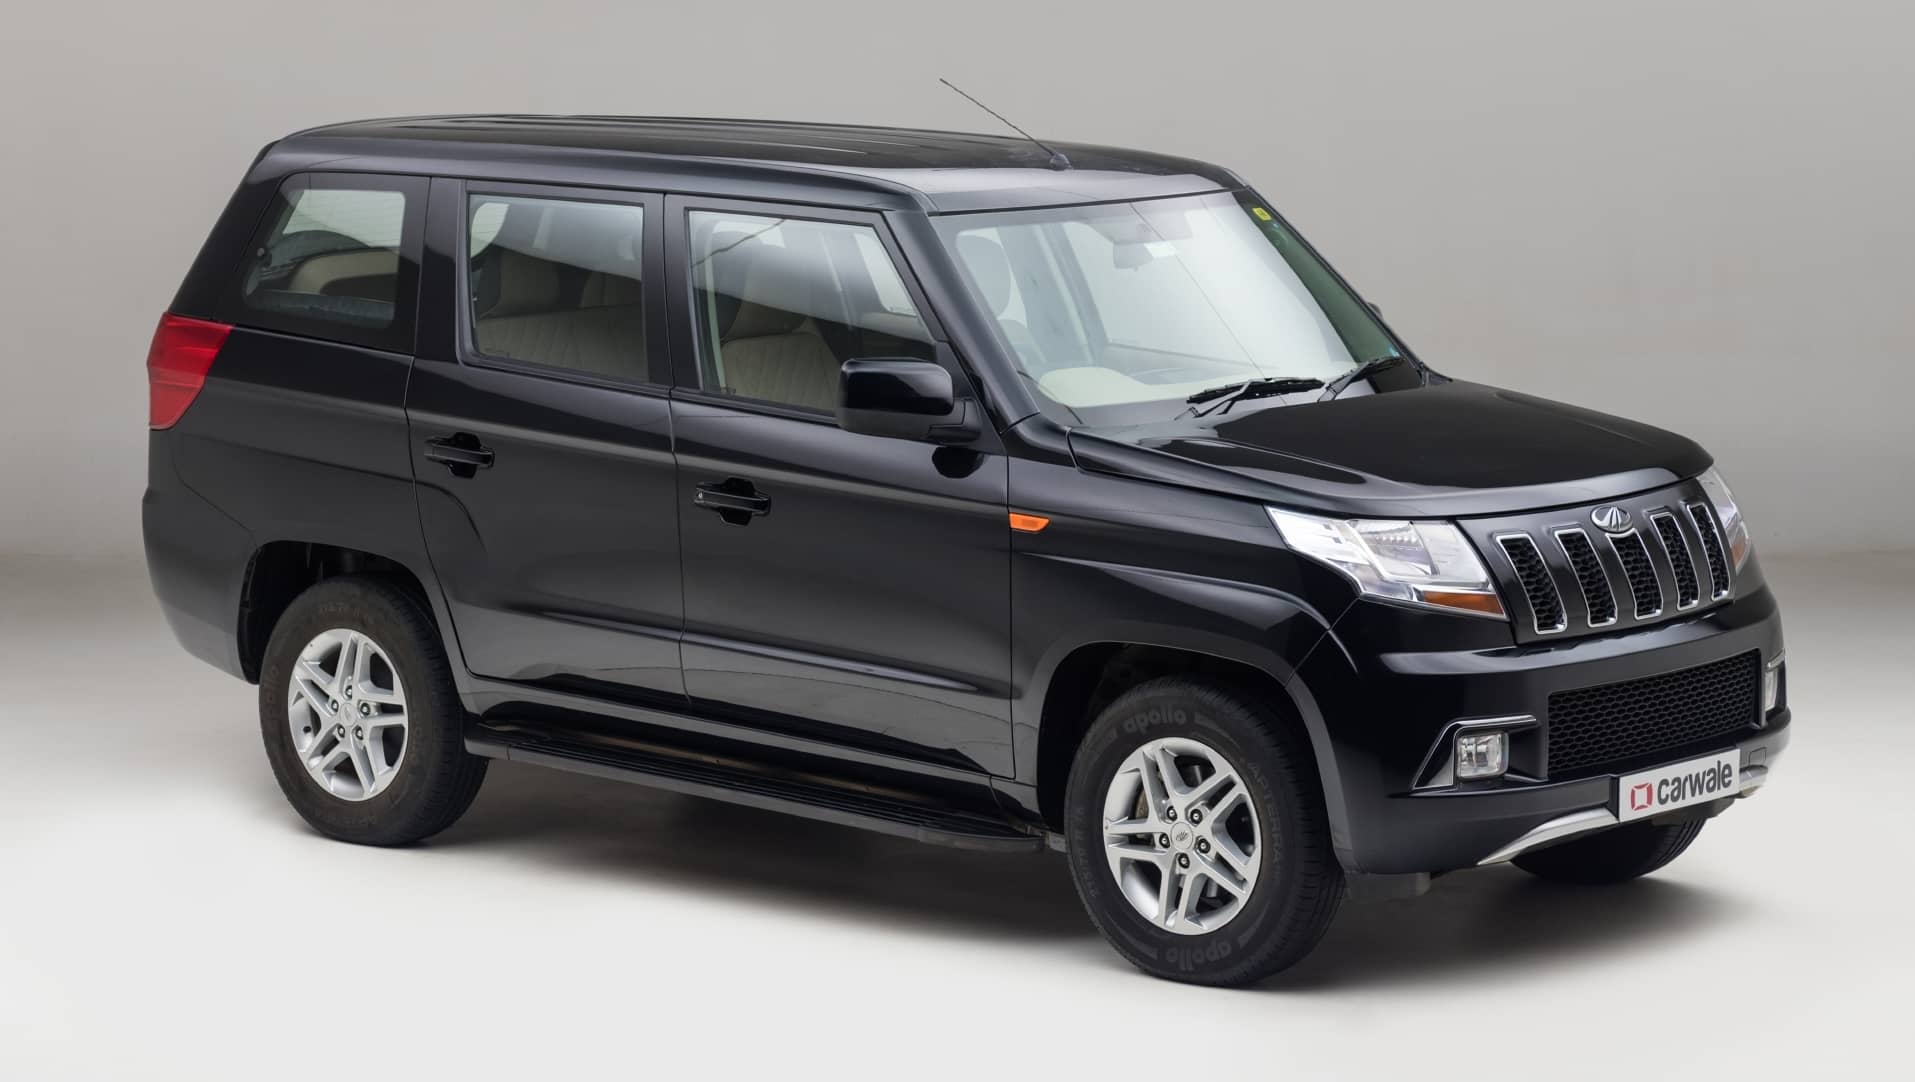 Top 9 10 Seater Vehicles In India List Of 9 10 Seater Cars In India